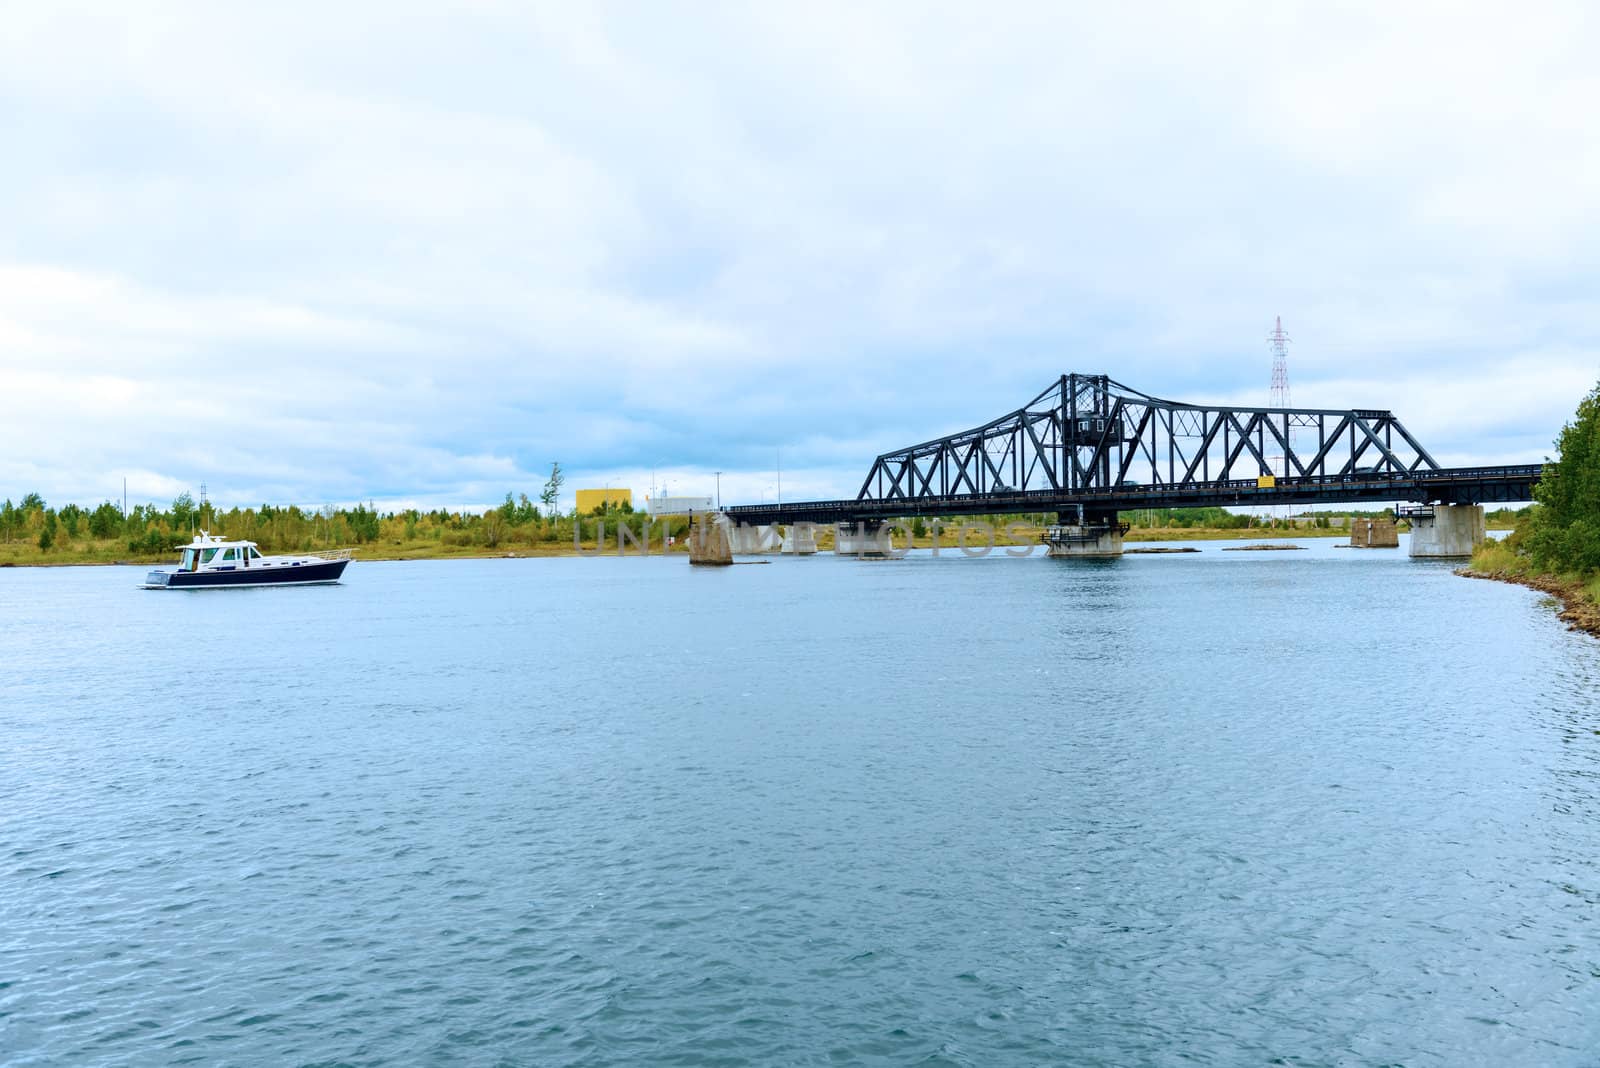 The bridge across a narrow channel separating Manitoulin Island from the much smaller Goat Island, forming the only land access. It consists of two 21 m (70 ft) deck plate girder approaches on the north end (Goat Island) and a single 18 m (60 ft) deck plate girder approach on the south end (Manitoulin Island), with a 112 m (368 ft) through swing bridge span. The swing bridge sits 5.3 m (17.5 ft) above mean water level, and provides a 48 m (160 ft) opening on either side of the central pier for water passage. Construction of the bridge was started by the Algoma Eastern Railway with the abutments and piers being built in 1912 and the bridge structure being erected in 1913. The Algoma Eastern Railway began operating trains across the bridge to the community of Little Current in October 1913. 